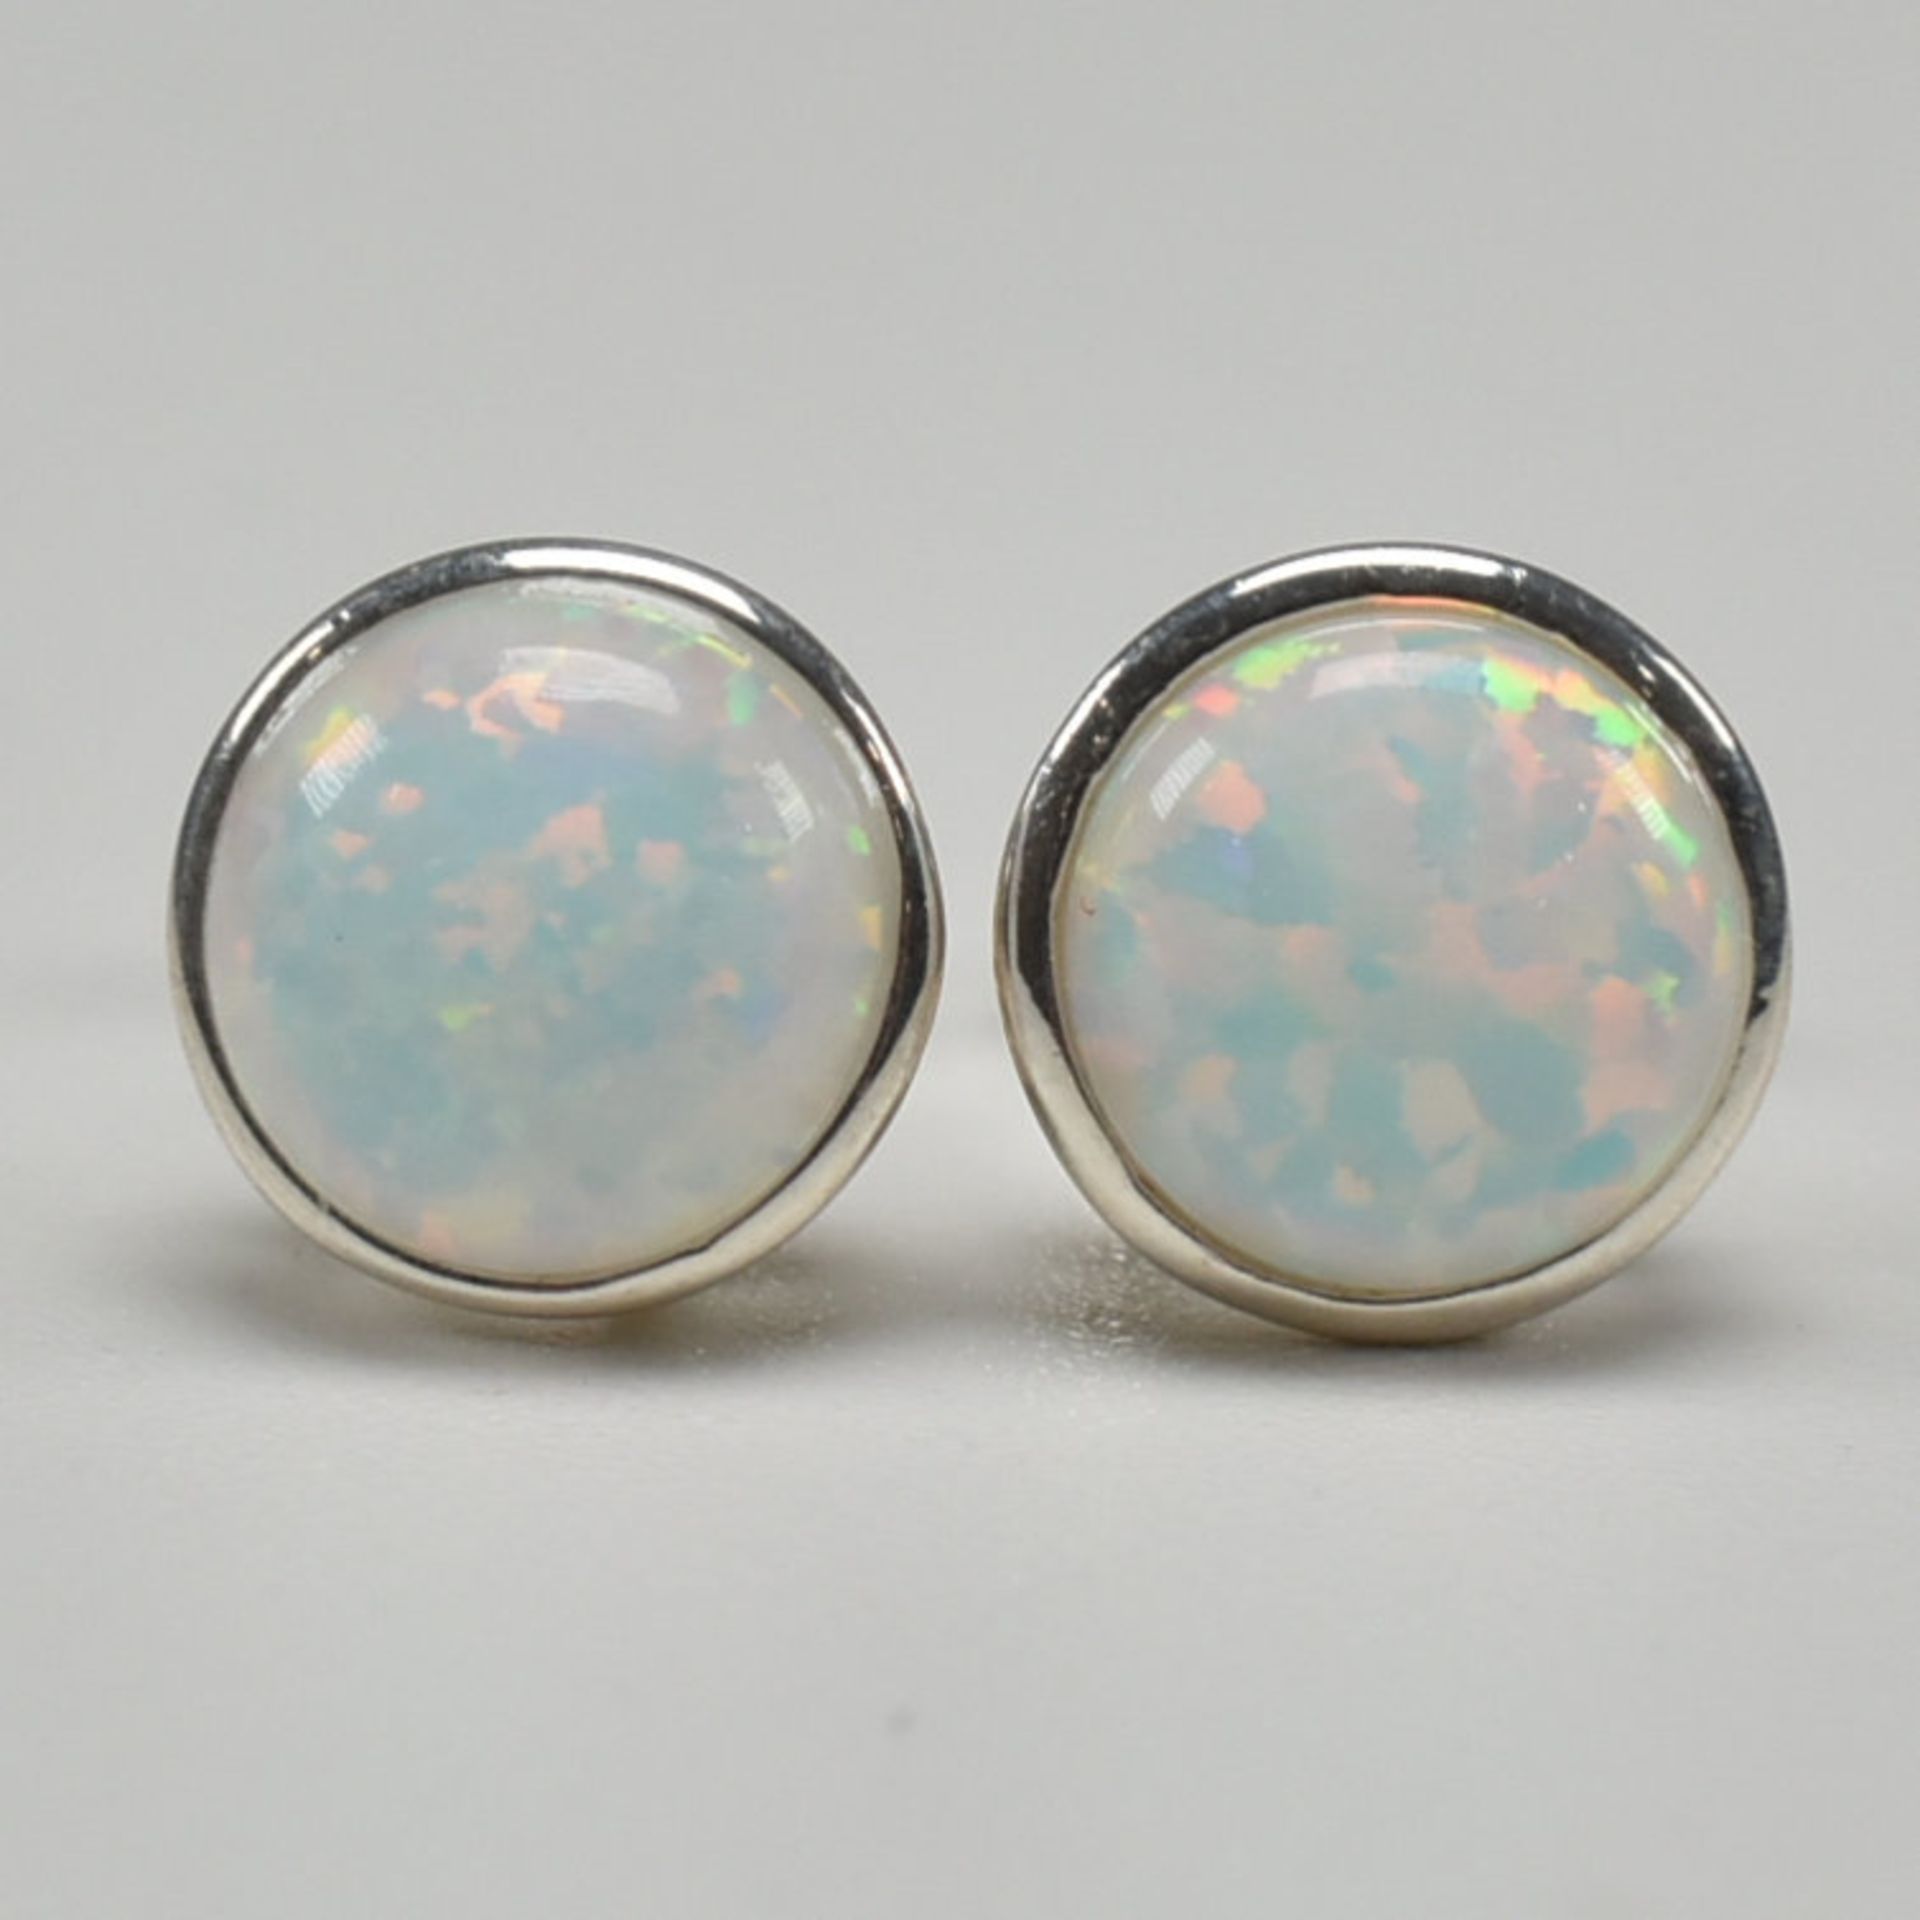 PAIR 925 SILVER & SYNTHETIC OPAL STUD EARRINGS - Image 2 of 6